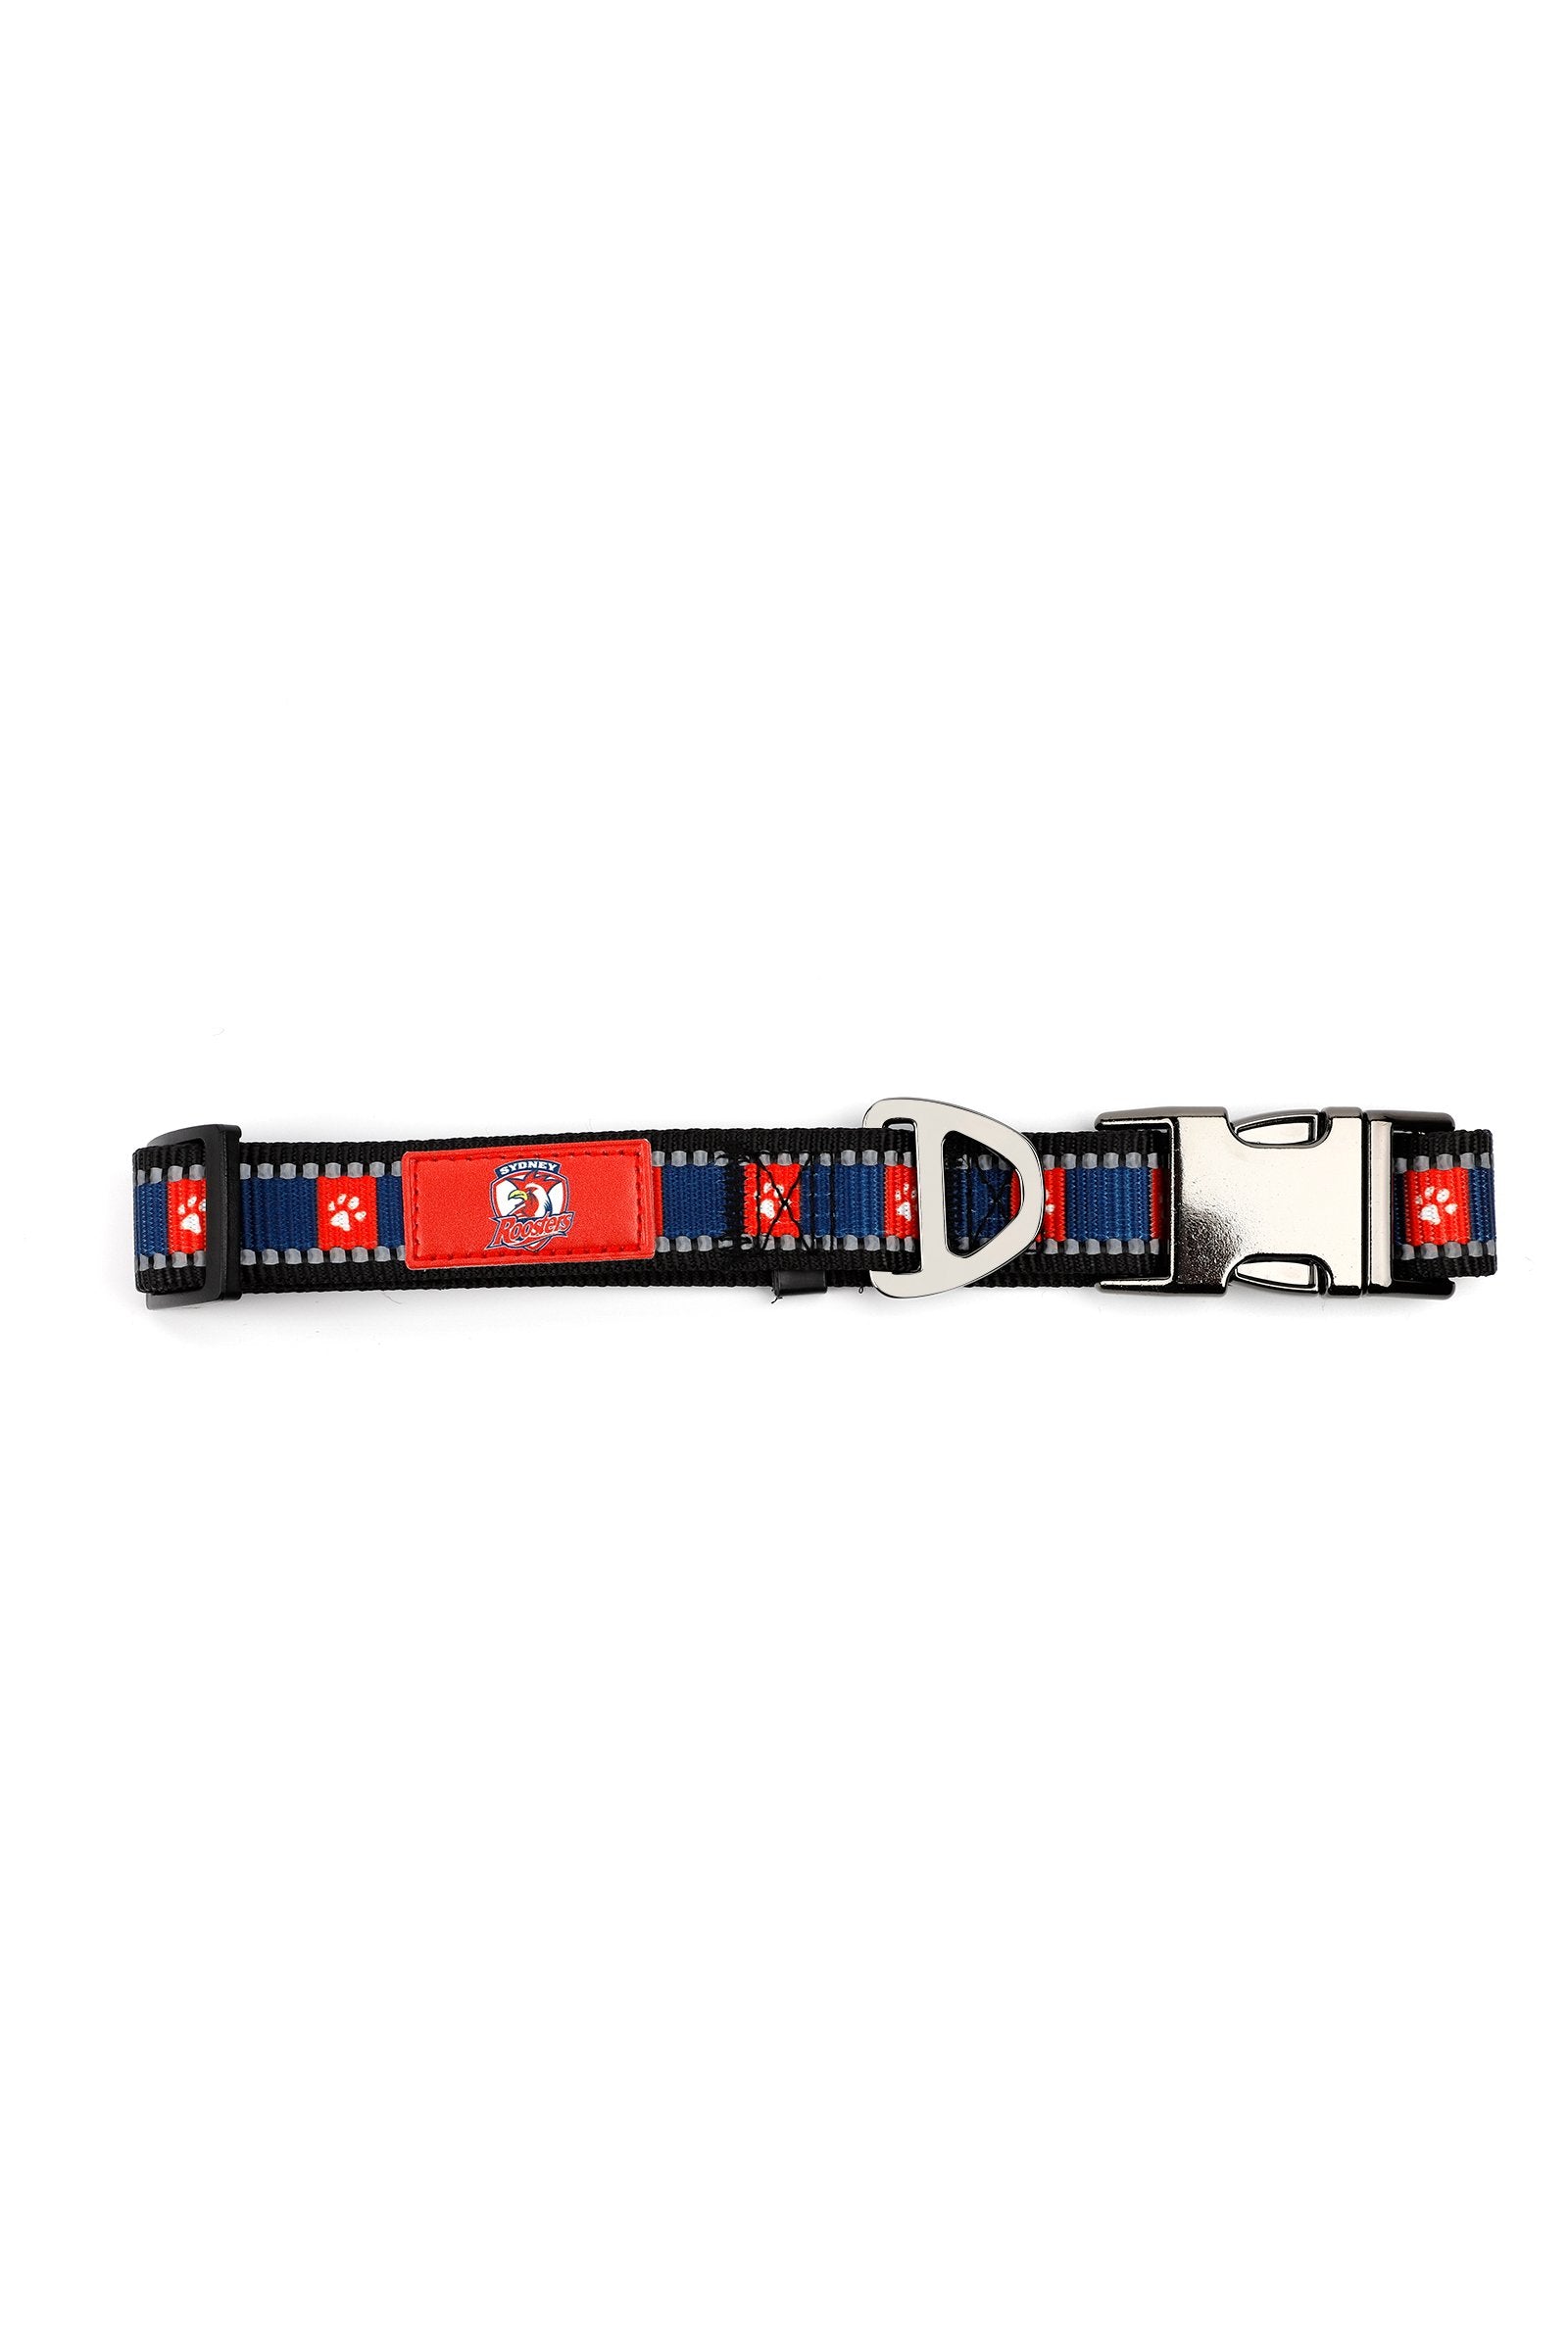 NRL DOG COLLARS_SYDNEY ROOSTERS_STUBBY CLUB